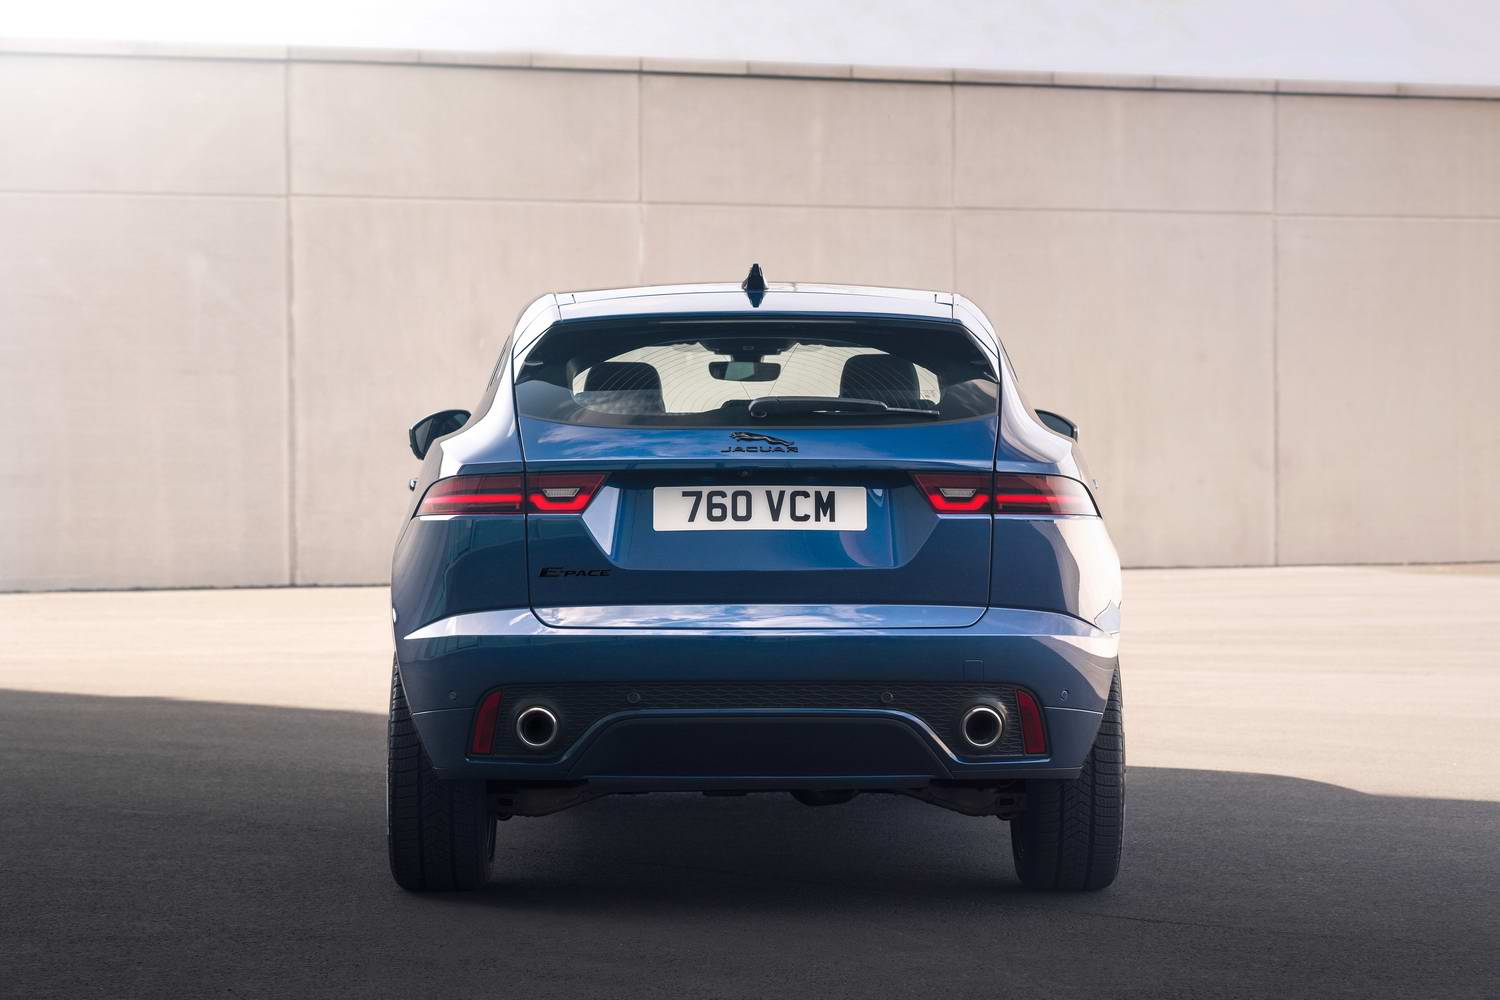 Jaguar E-Pace gets 2021 update - car and motoring news by ...